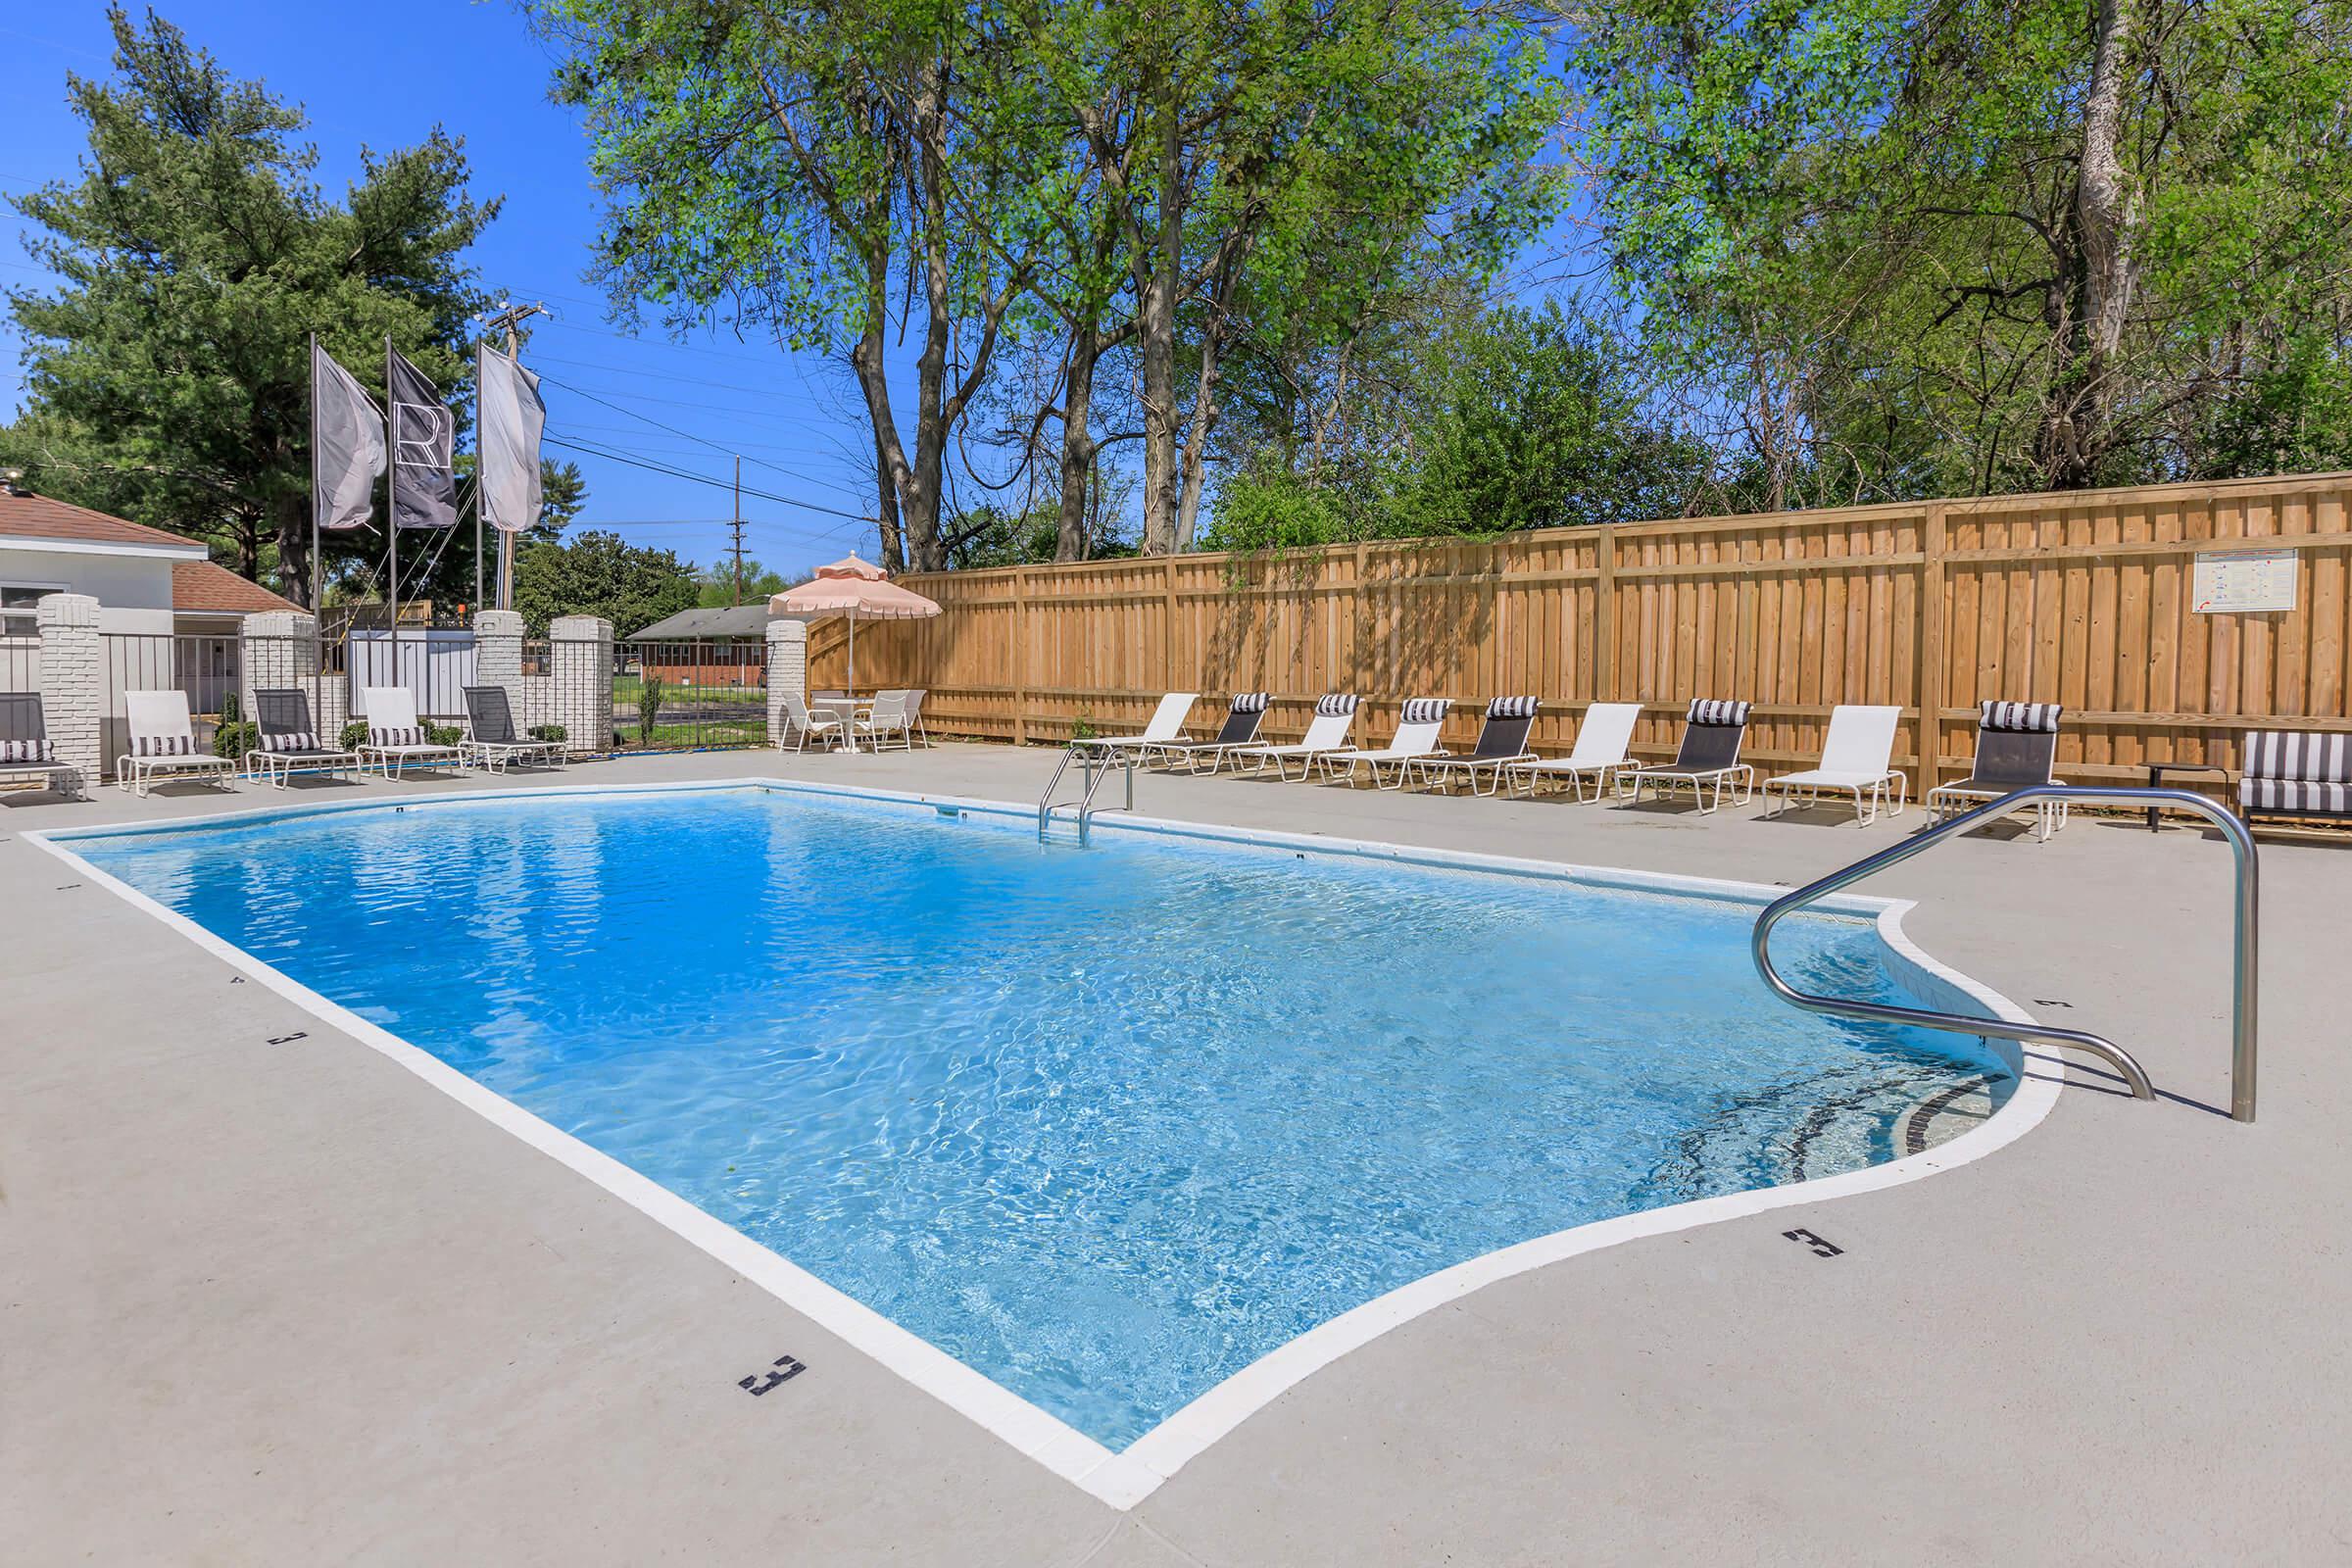 While blue skies prevail, take a cool dip in the pool.